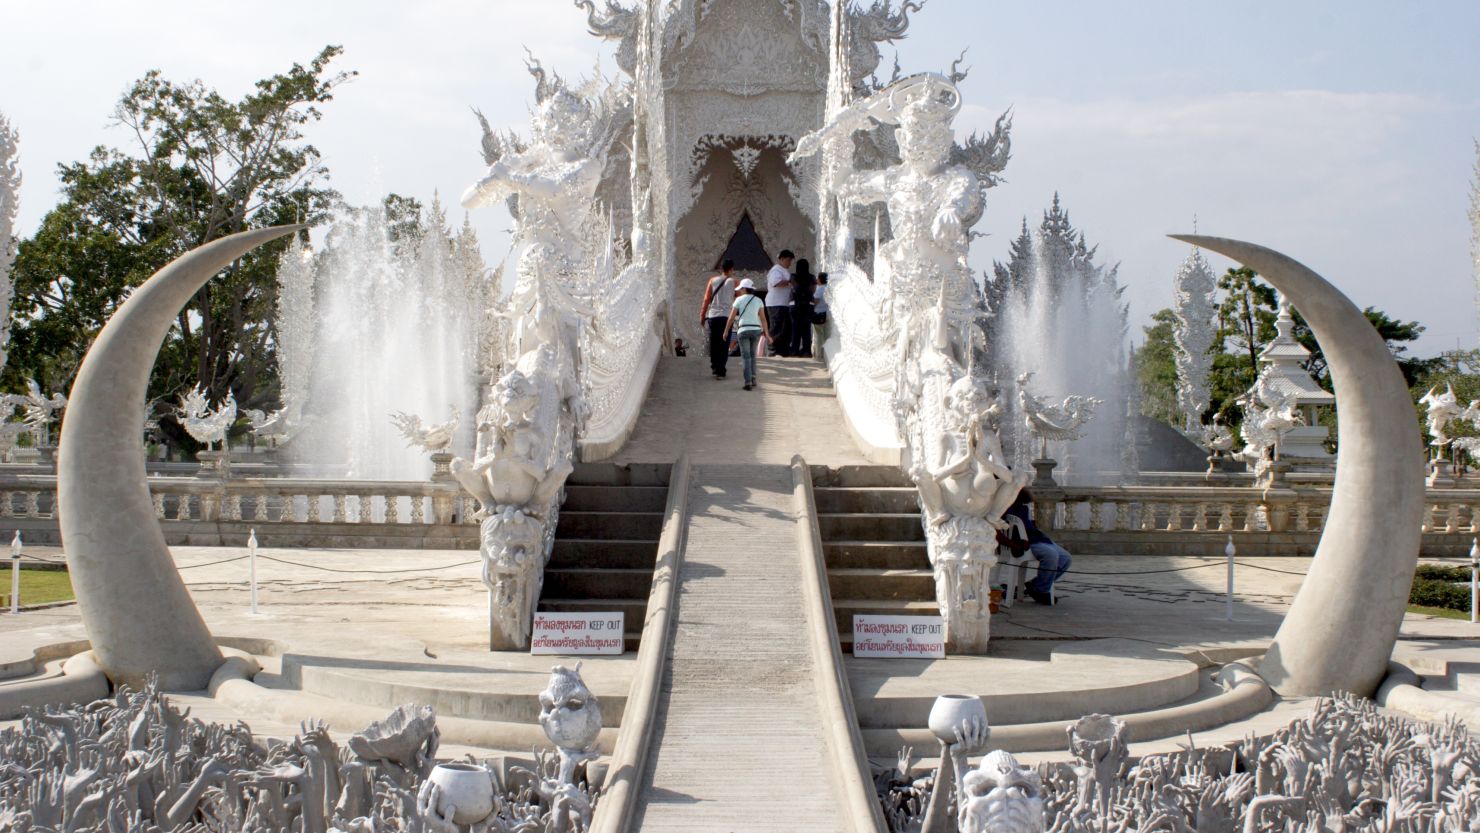  Visitors must cross a bridge to the Wat Rong Khun temple over a field of fangs and statues reaching up from hell.